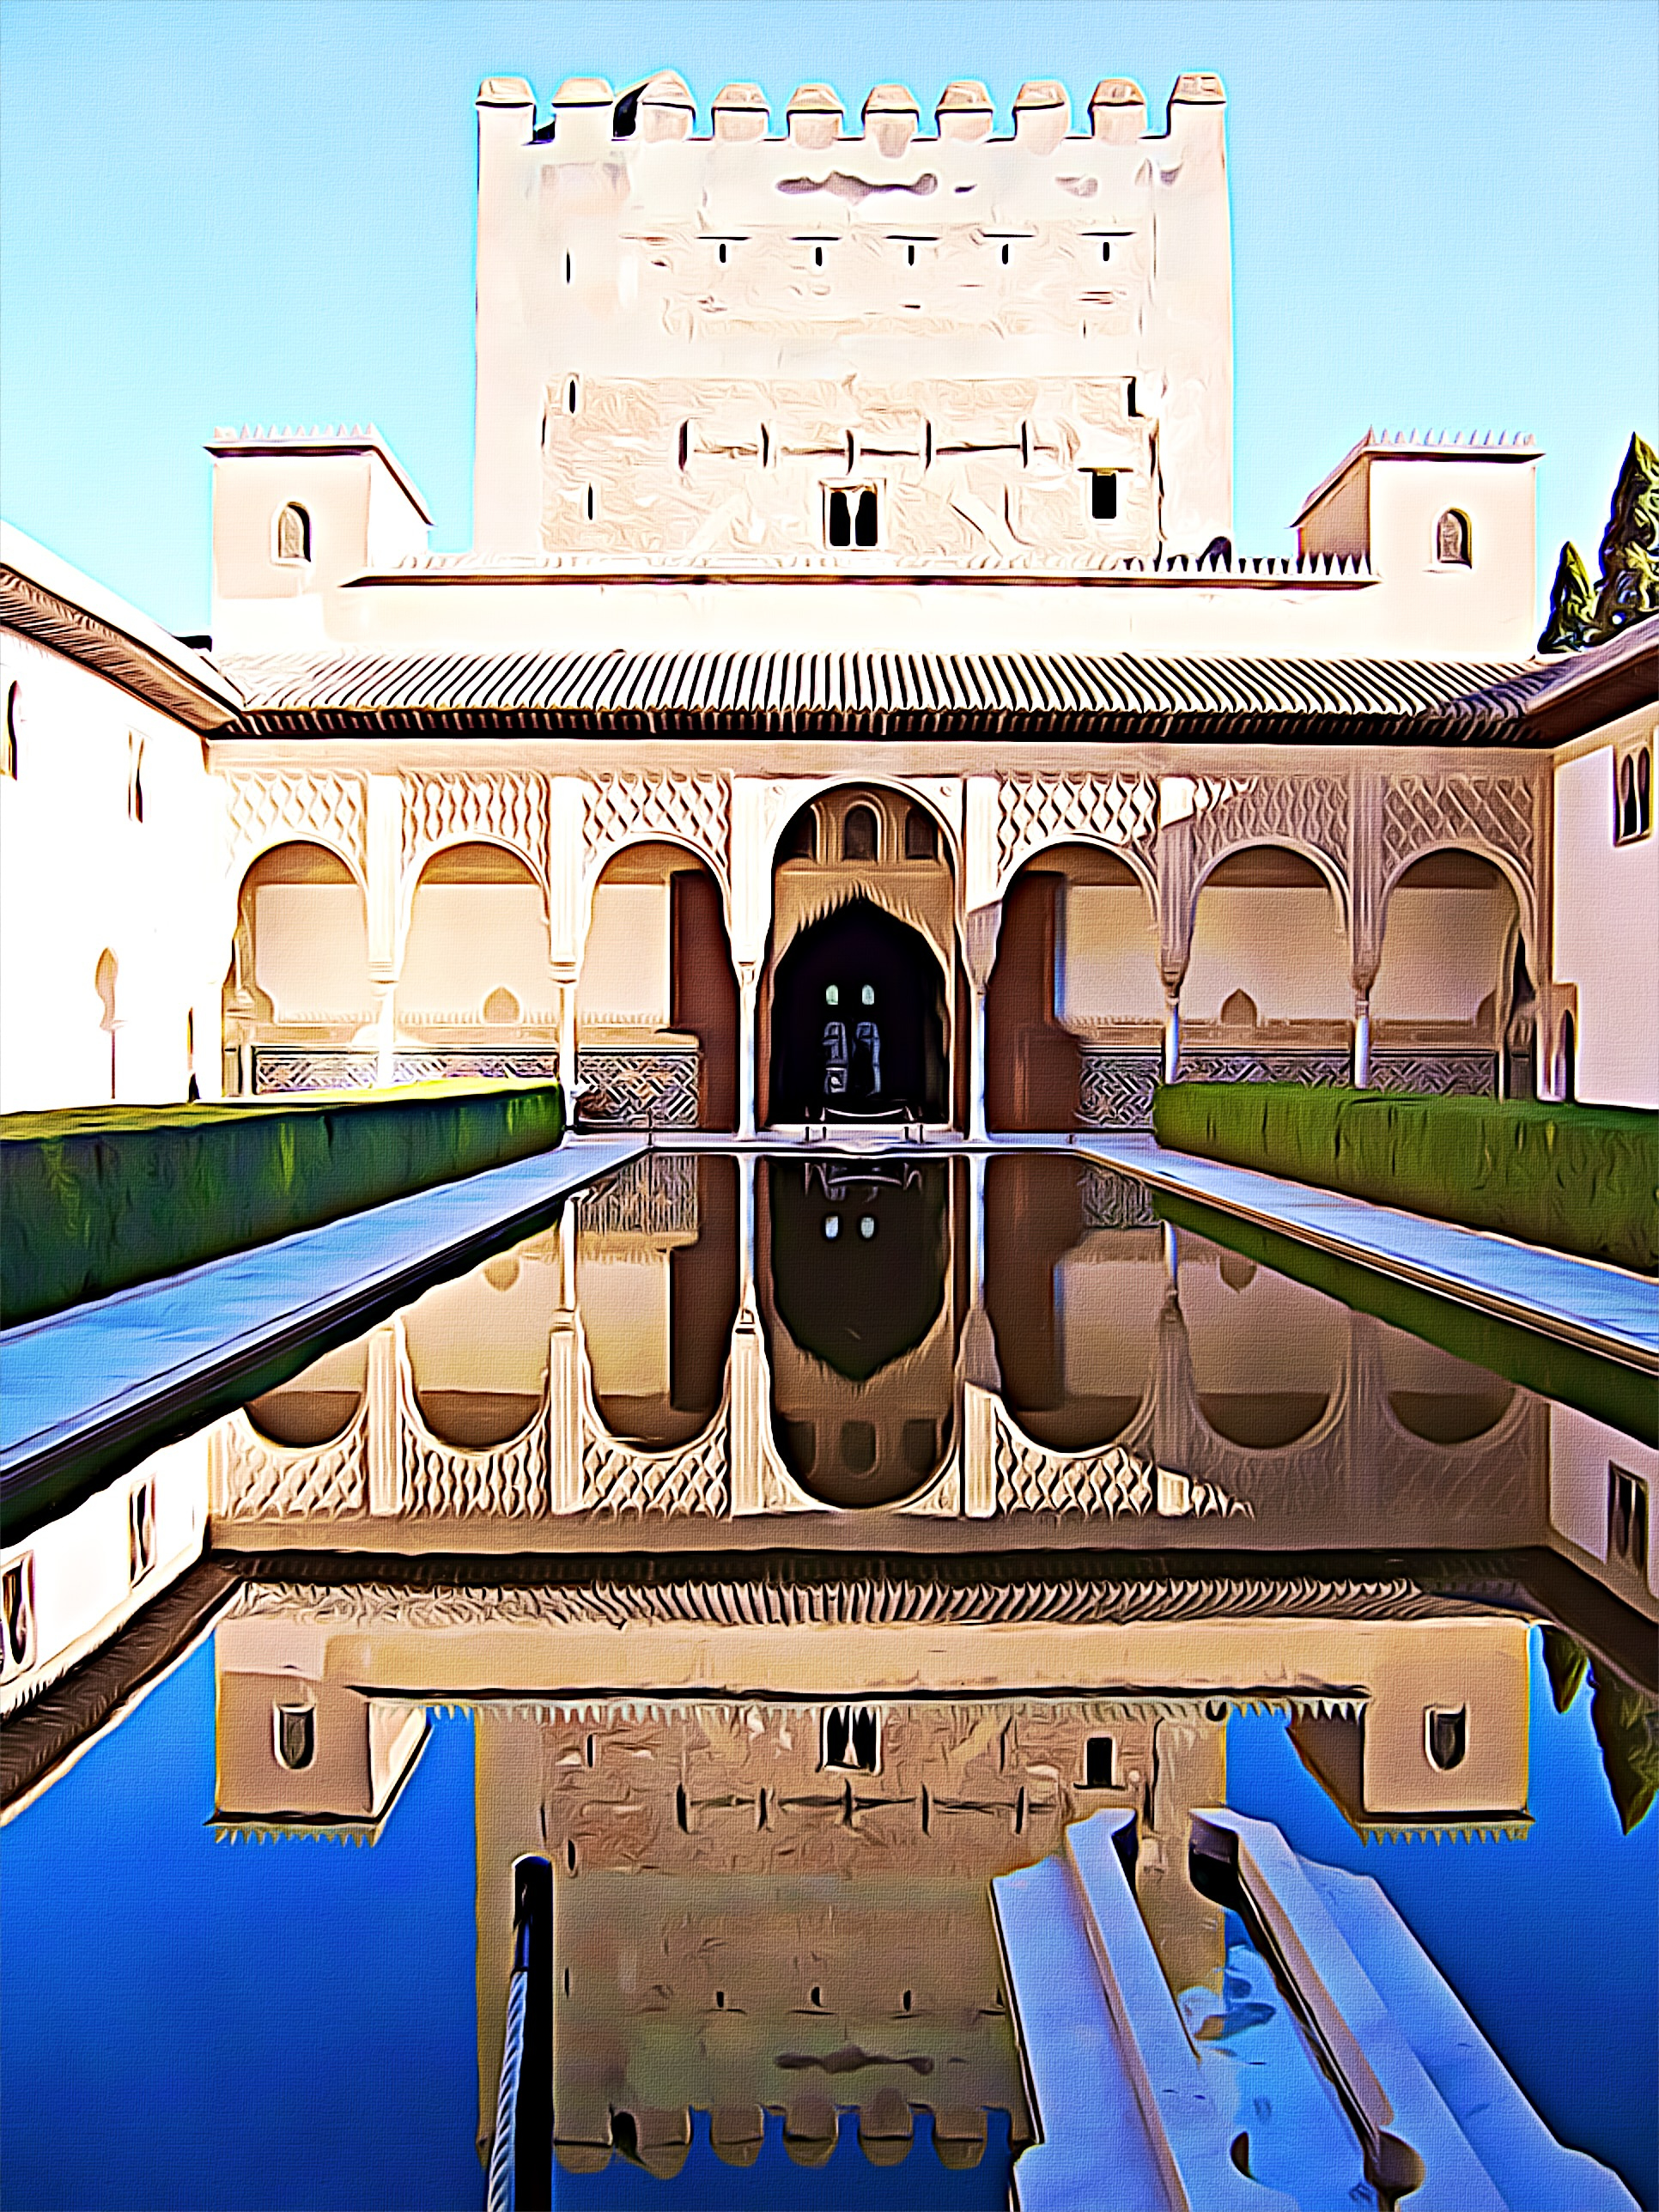 Pool of the Alhambra